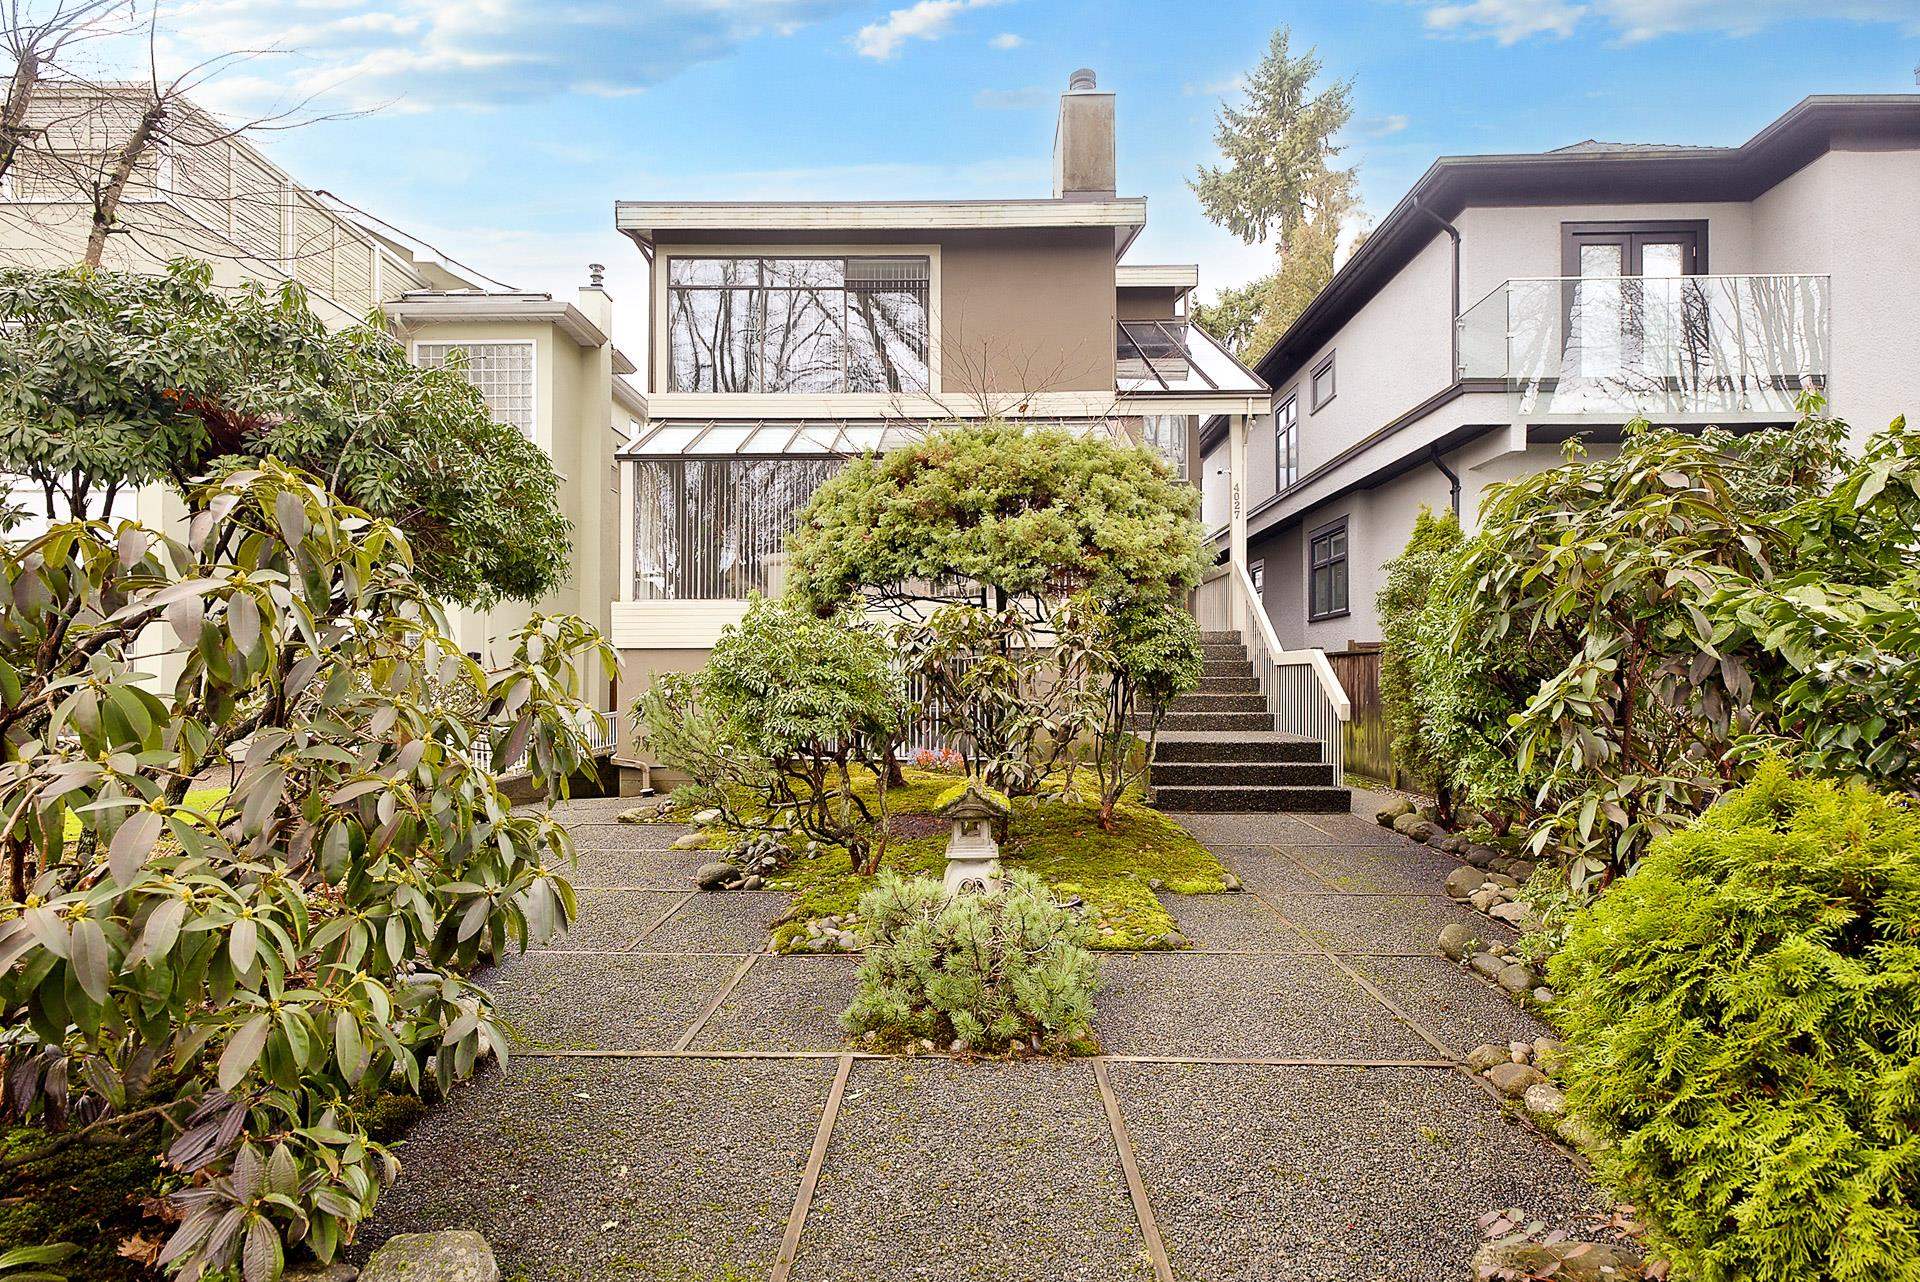 Listing image of 4027 W 32ND AVENUE